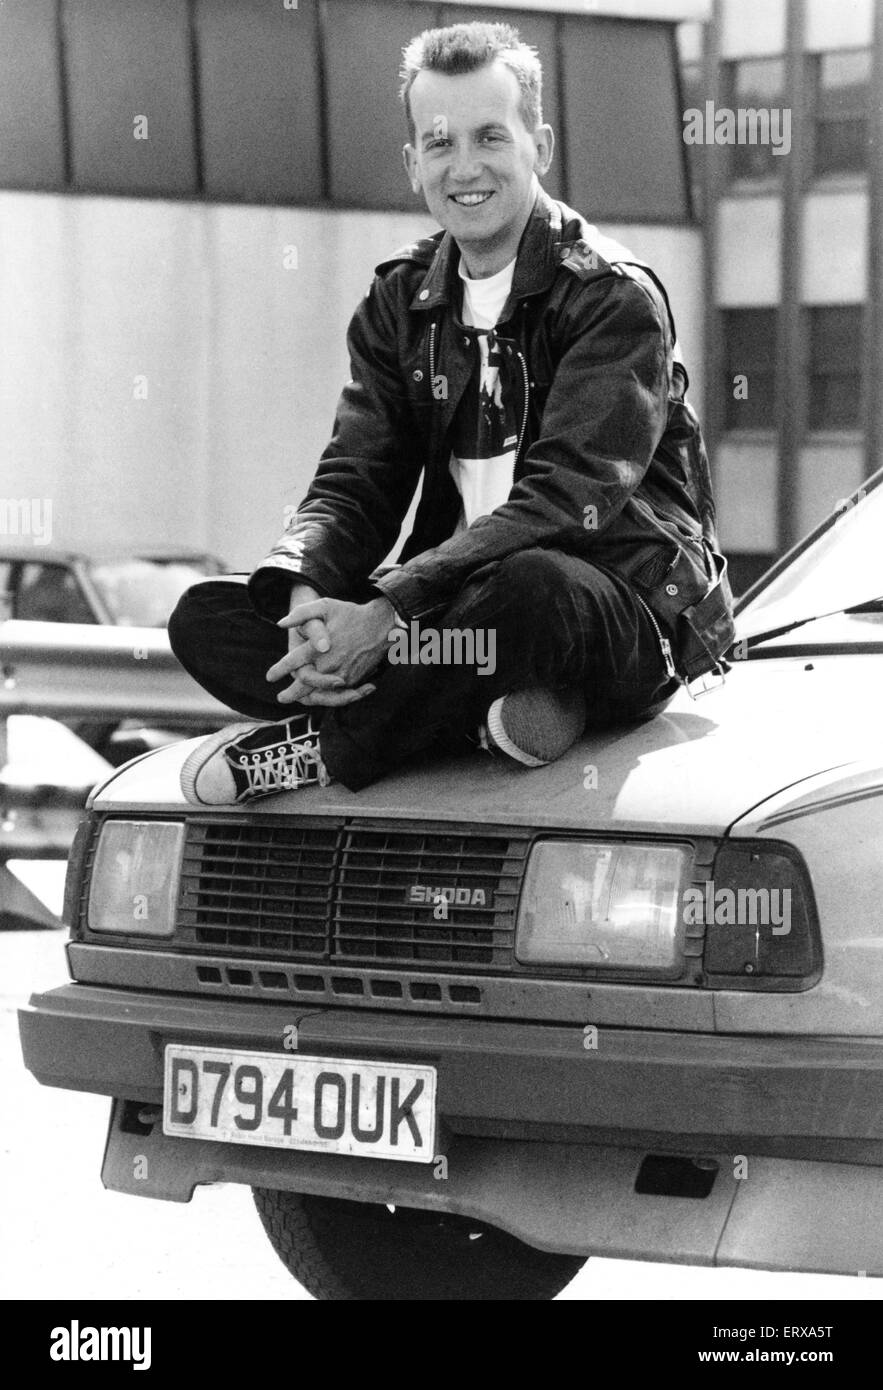 Comedian Frank Skinner who has just returned from the Edinburgh Festival, sitting on top of a car, 7th September 1990. Stock Photo